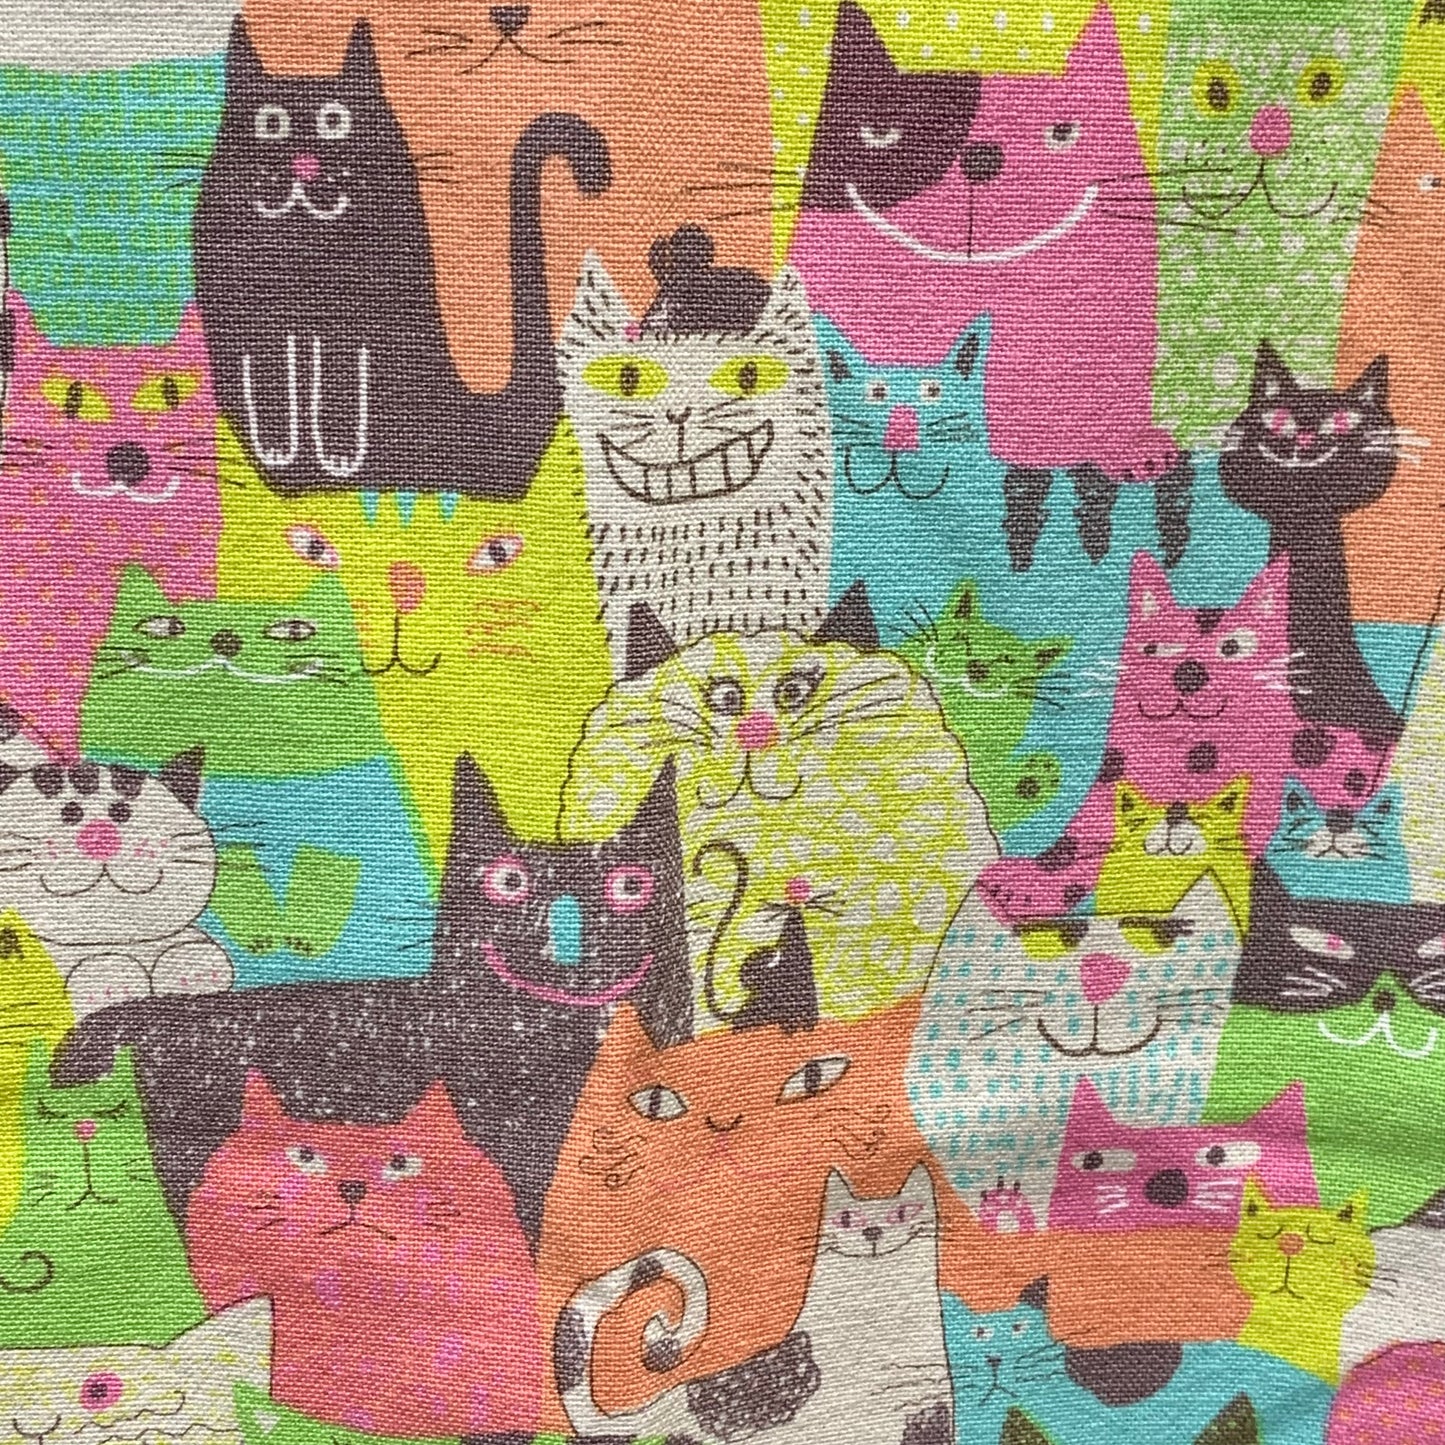 MAKIN' WHOOPEE - "Crazy Cats" APRON